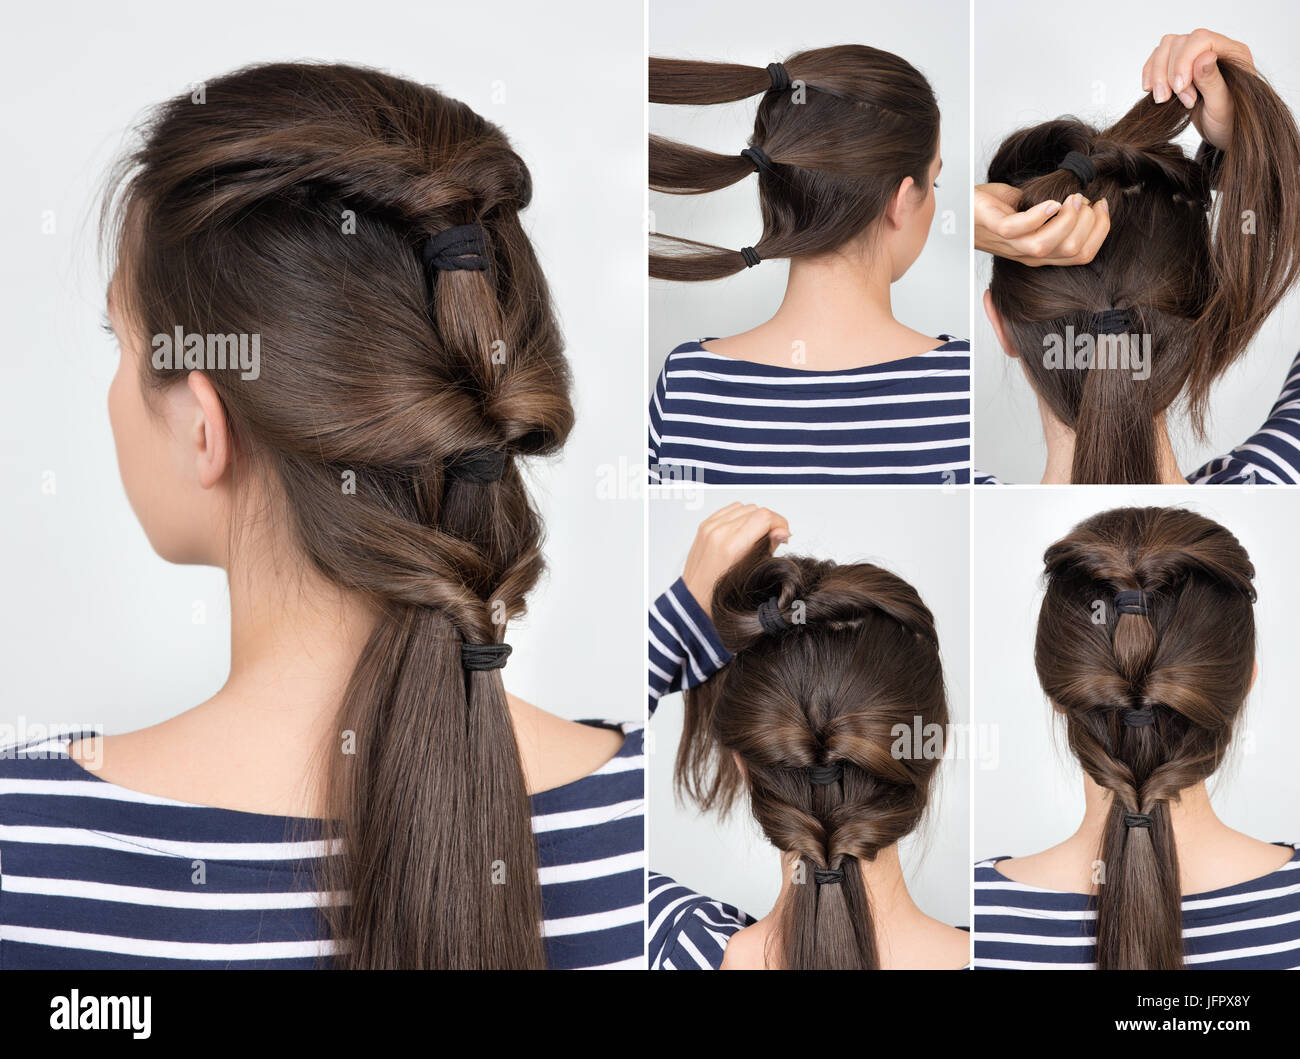 Simple Hairstyle With Scrunchy Hair Tutorial Step By Step